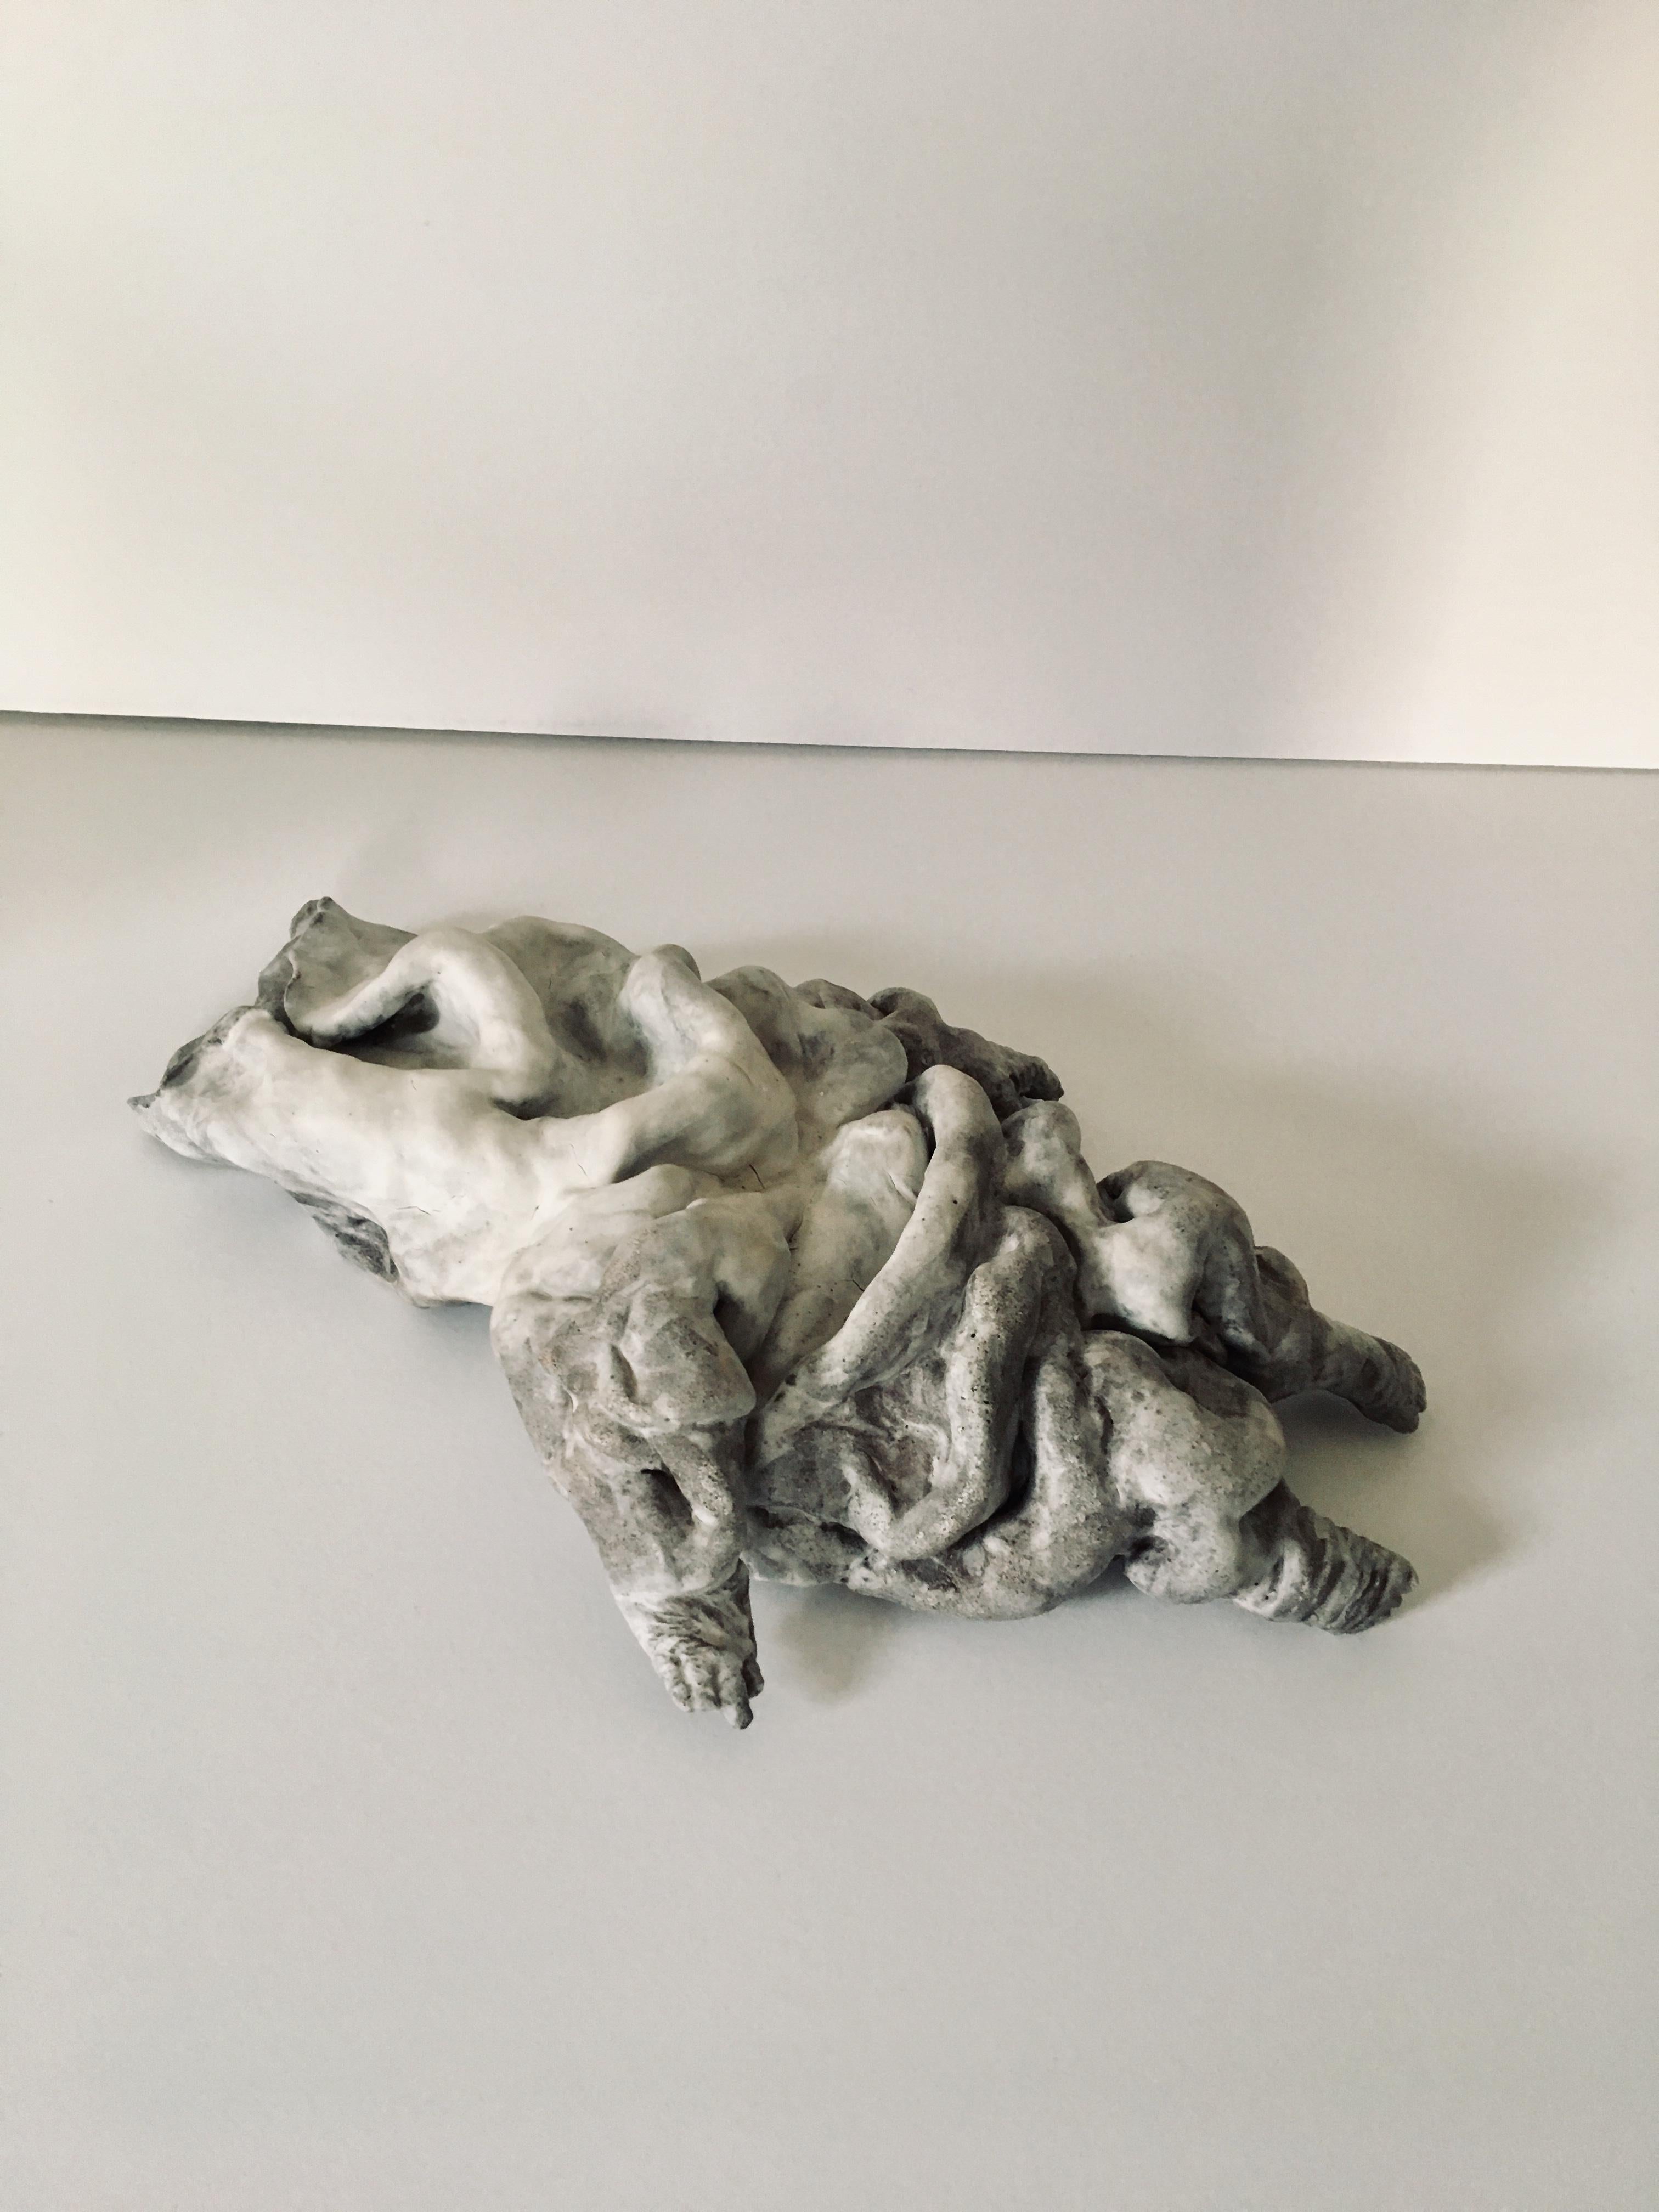 Ceramic figure lying down, sculpture: Figurative 'Wasted' - Contemporary Sculpture by Kenjiro Kitade